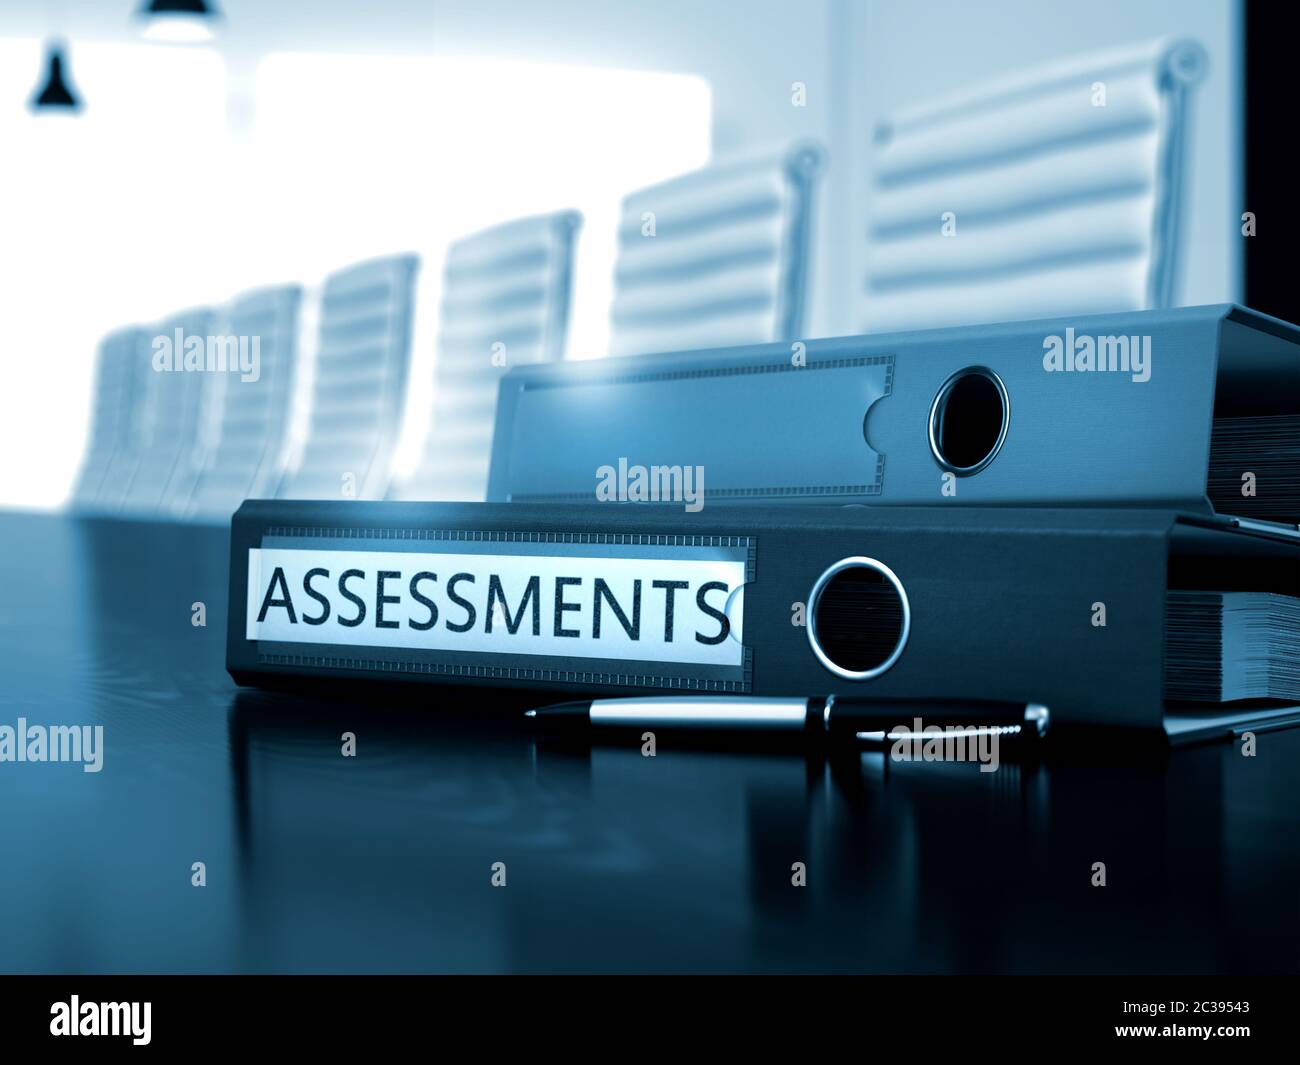 Assessments. Concept on Blurred Background. Binder with Inscription Assessments on Working Wooden Desktop. Toned Image. 3D Rendering. Stock Photo